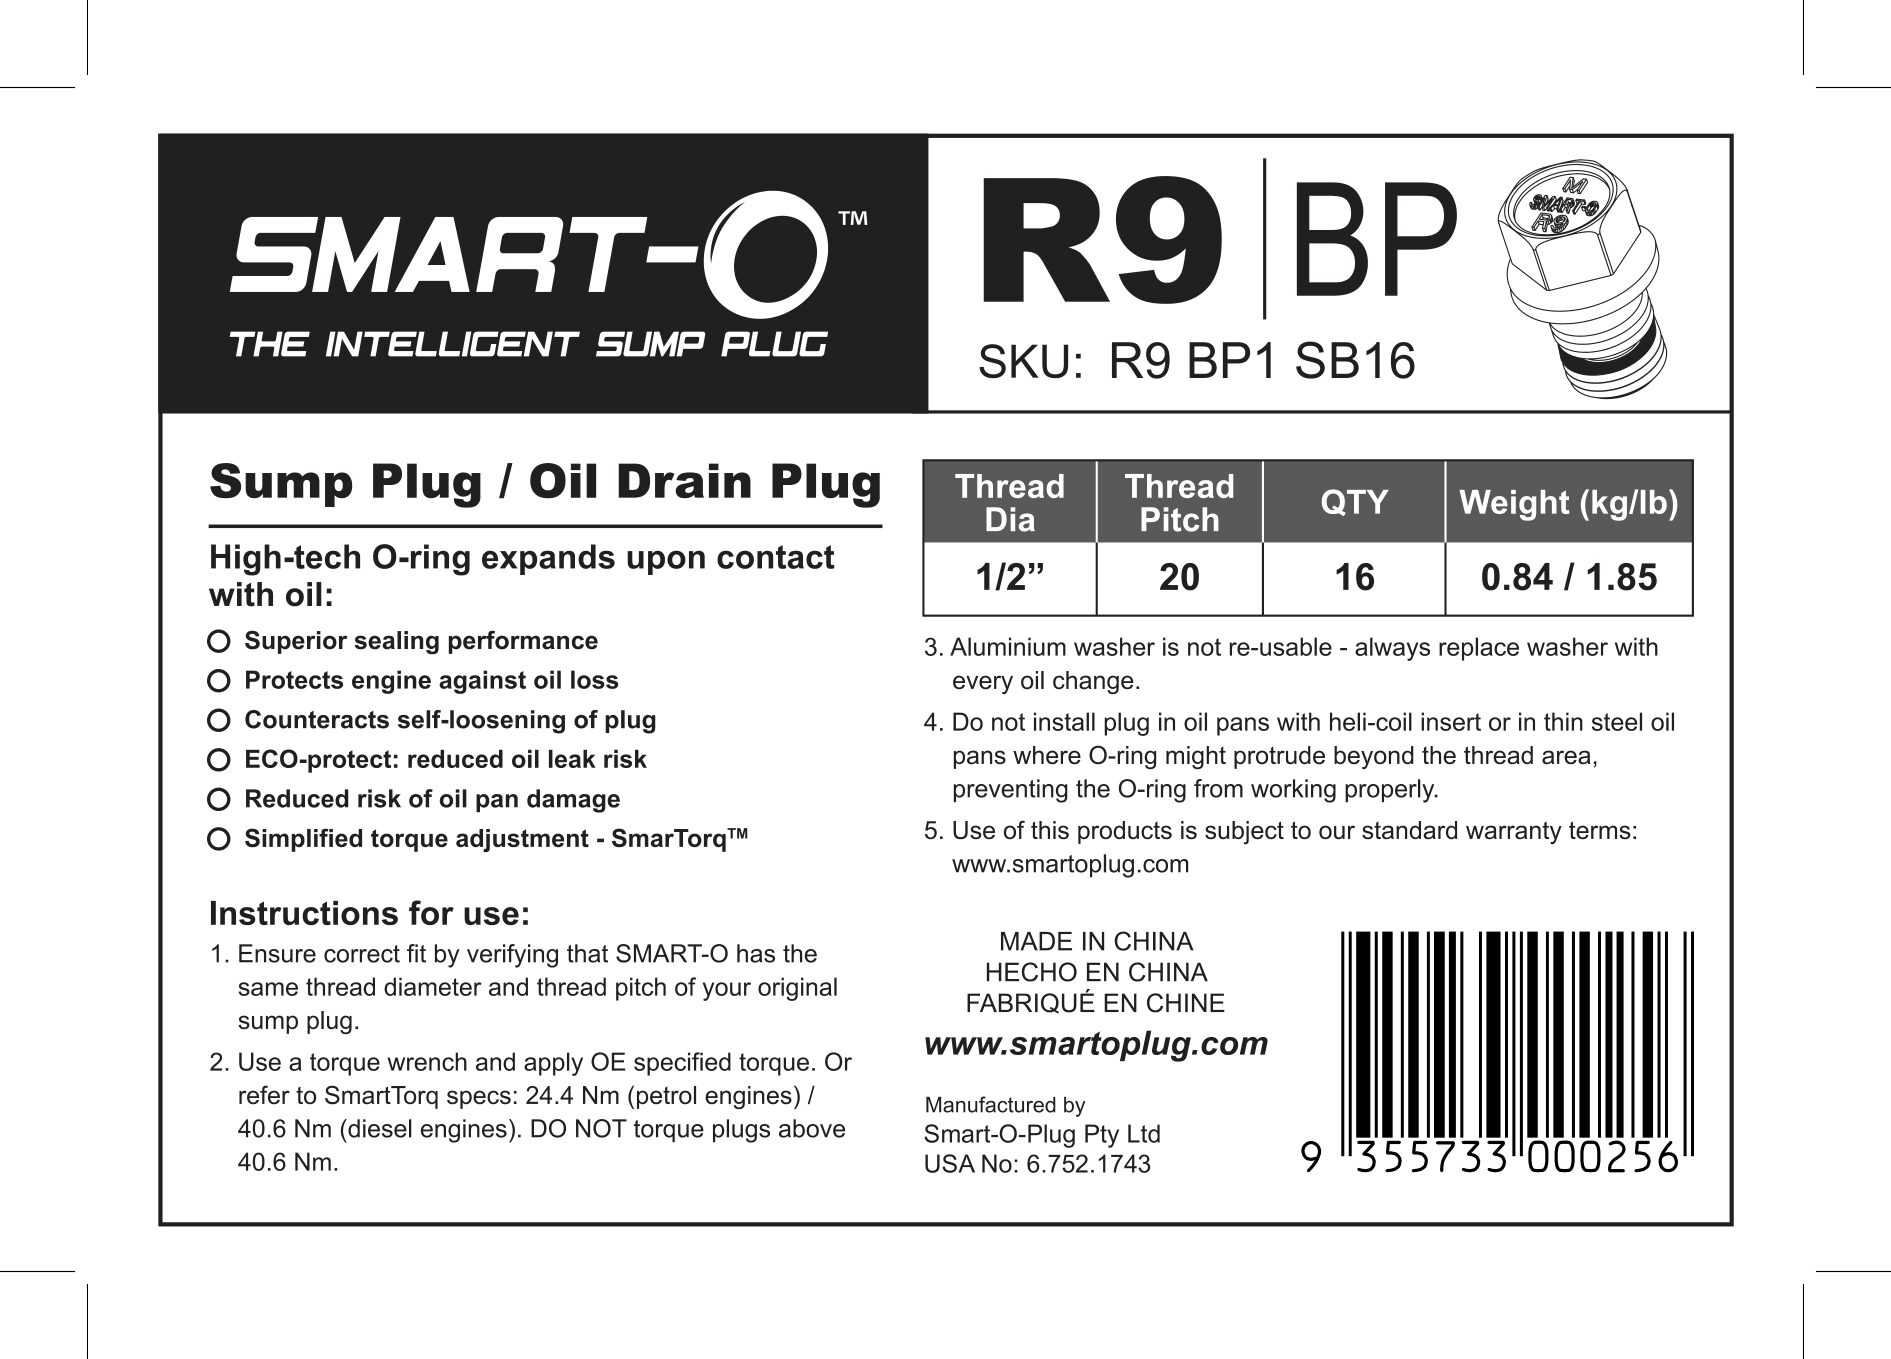 high-performance sealing technology The plug comes with Series of smart features benefits patented anti-leak and anti-vibration mechanism SMART-O R9 Oil Drain Plug 1/2 